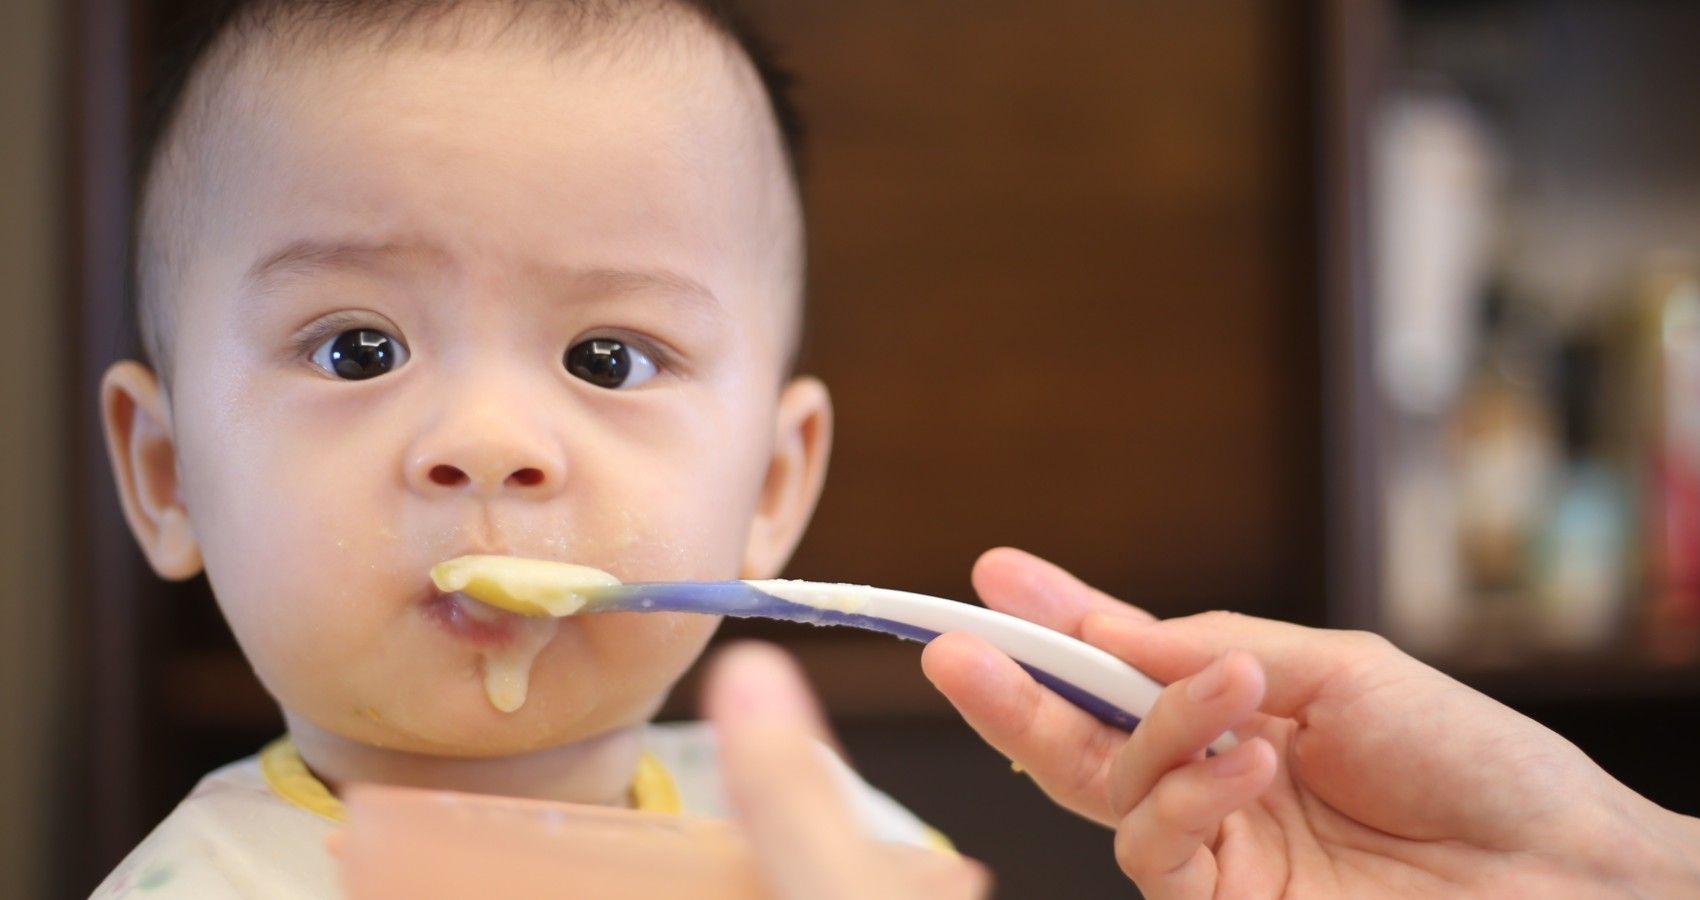 Infant Feeding Problems Linked With Higher Risk Of Developmental Delays, Study Finds